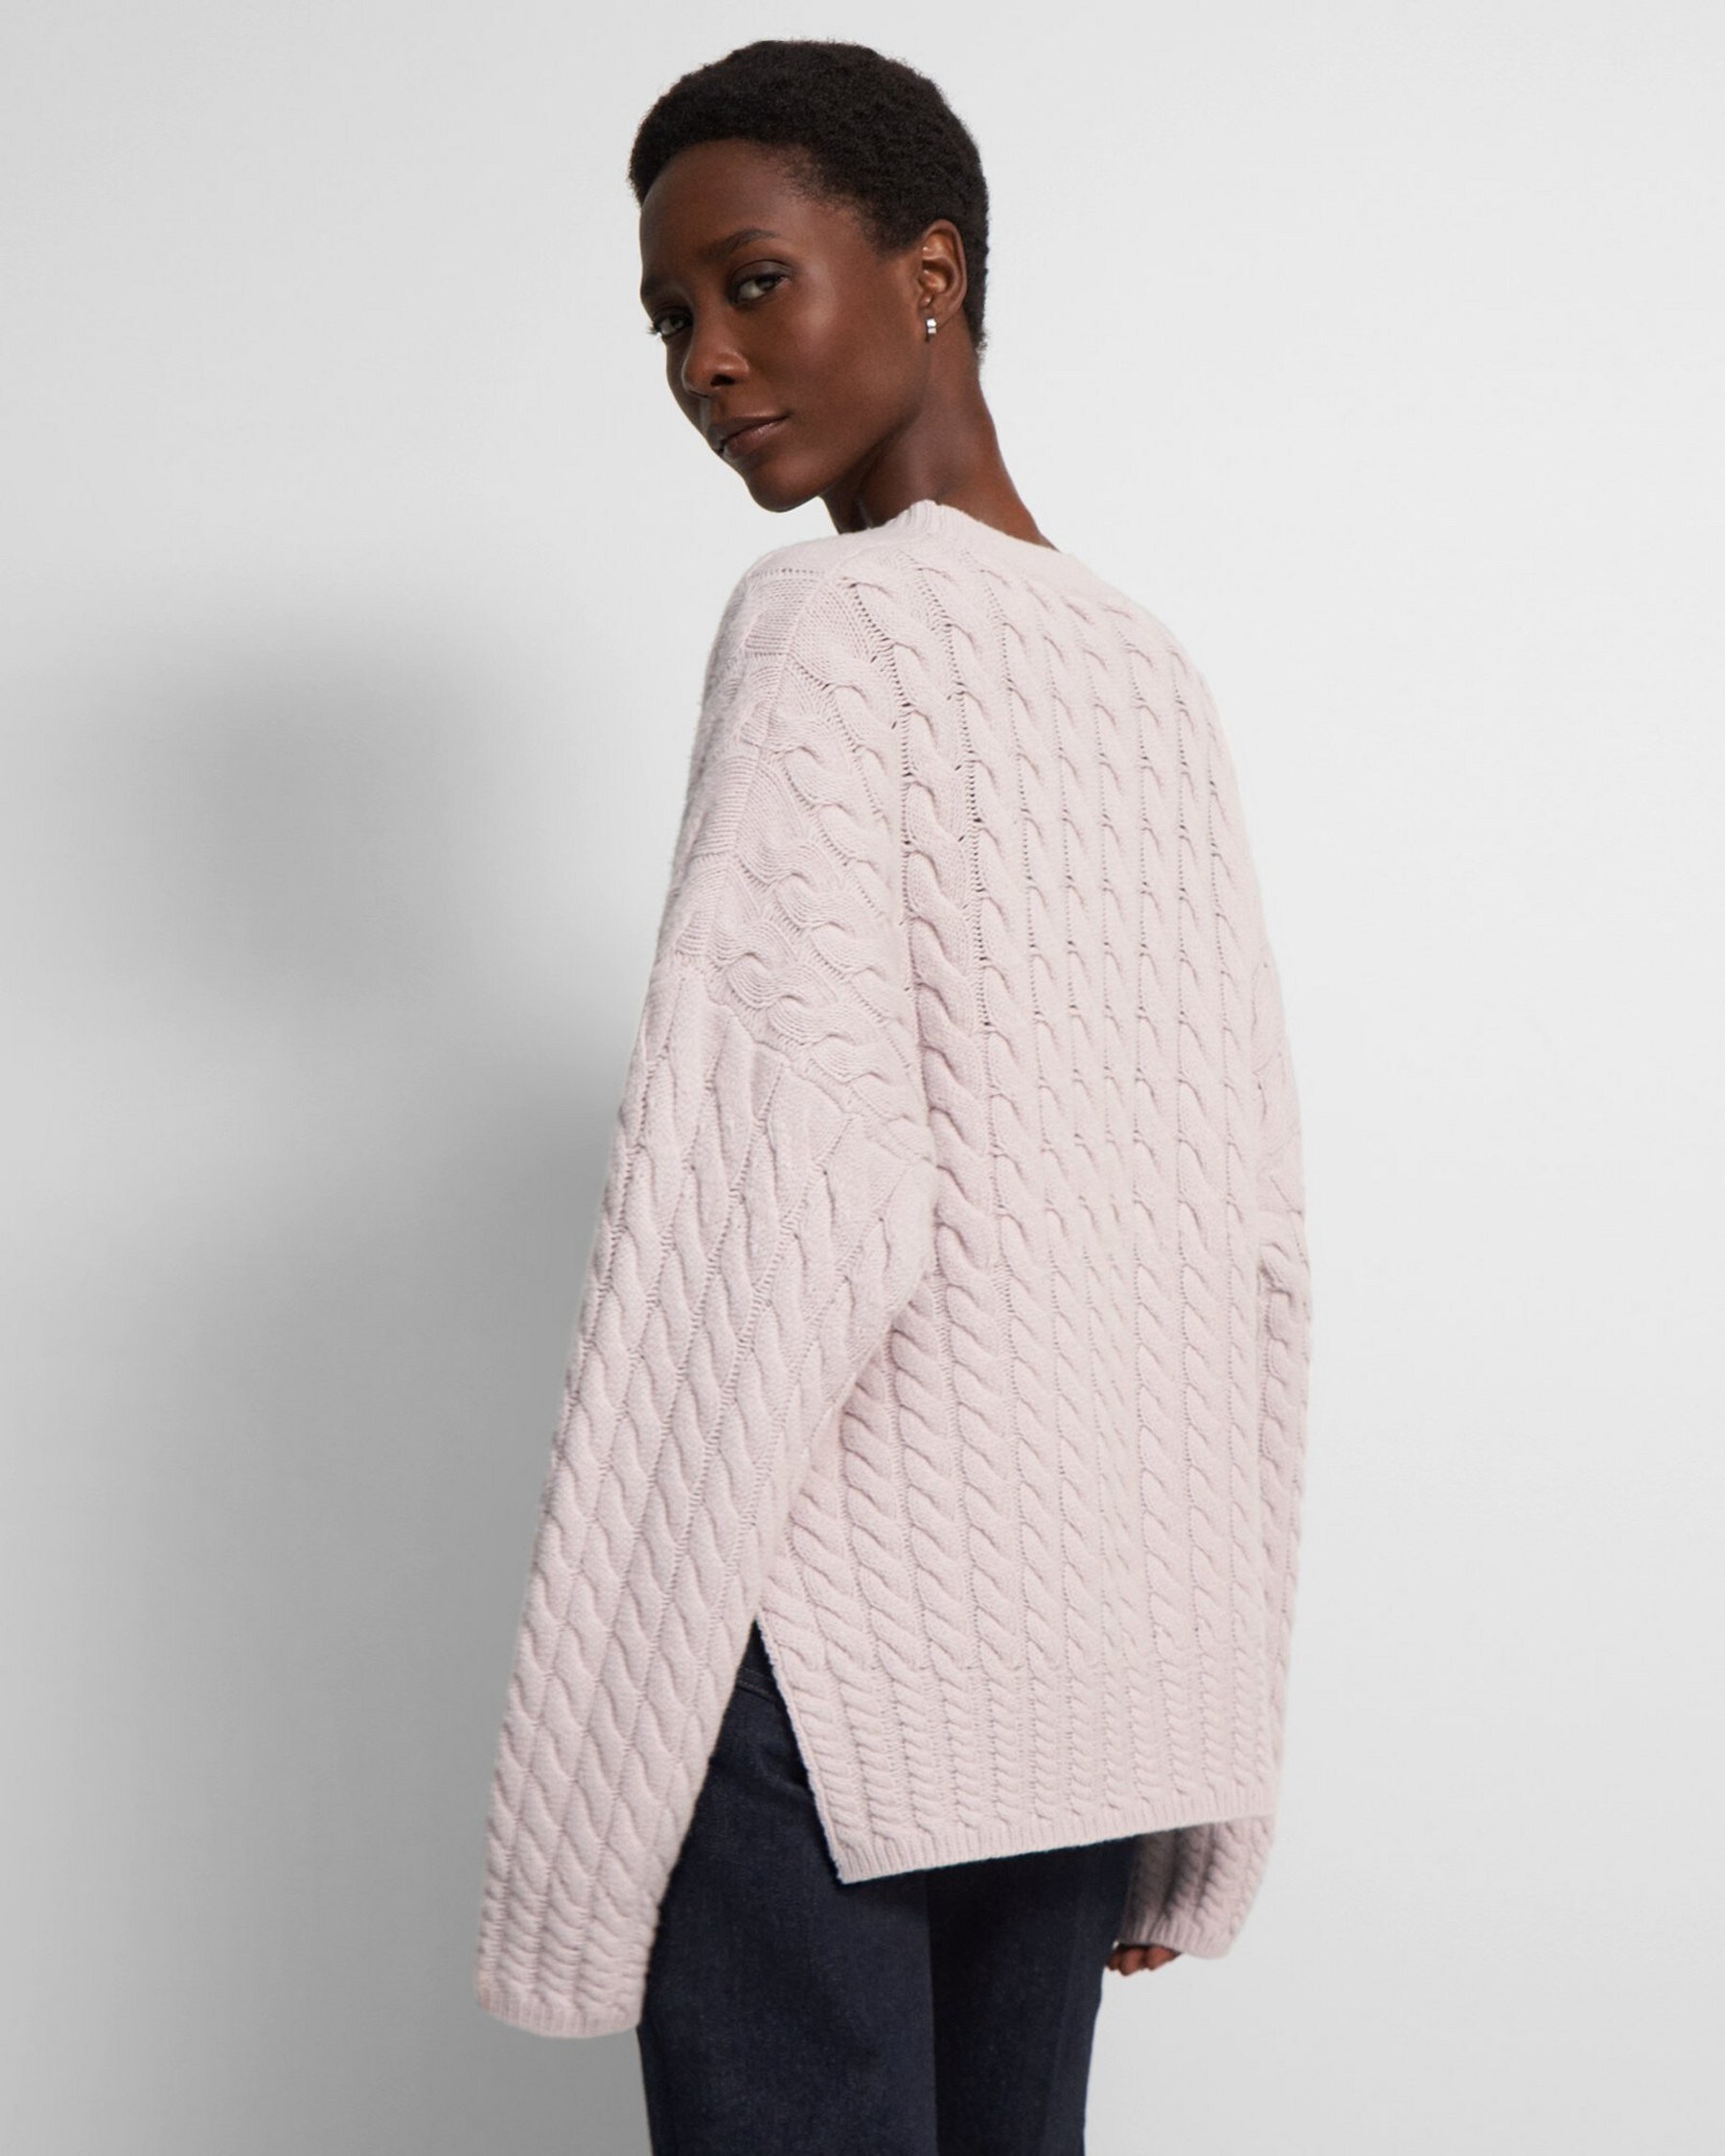 Karenia Cable Knit Sweater in Felted Wool-Cashmere